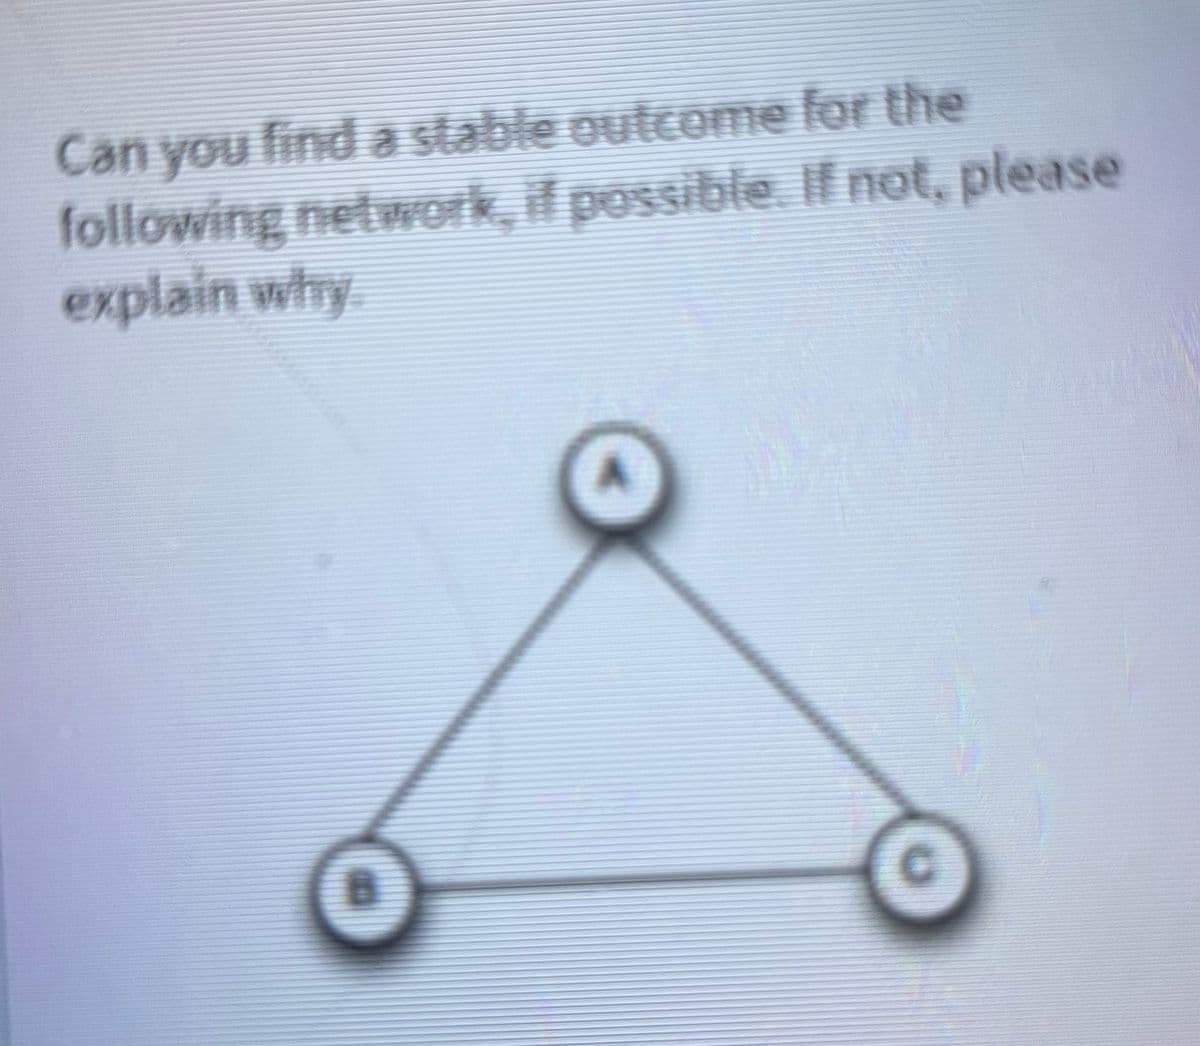 Can you find a stable outcome for the
following network, if possible. If not, please
explain why
A
C